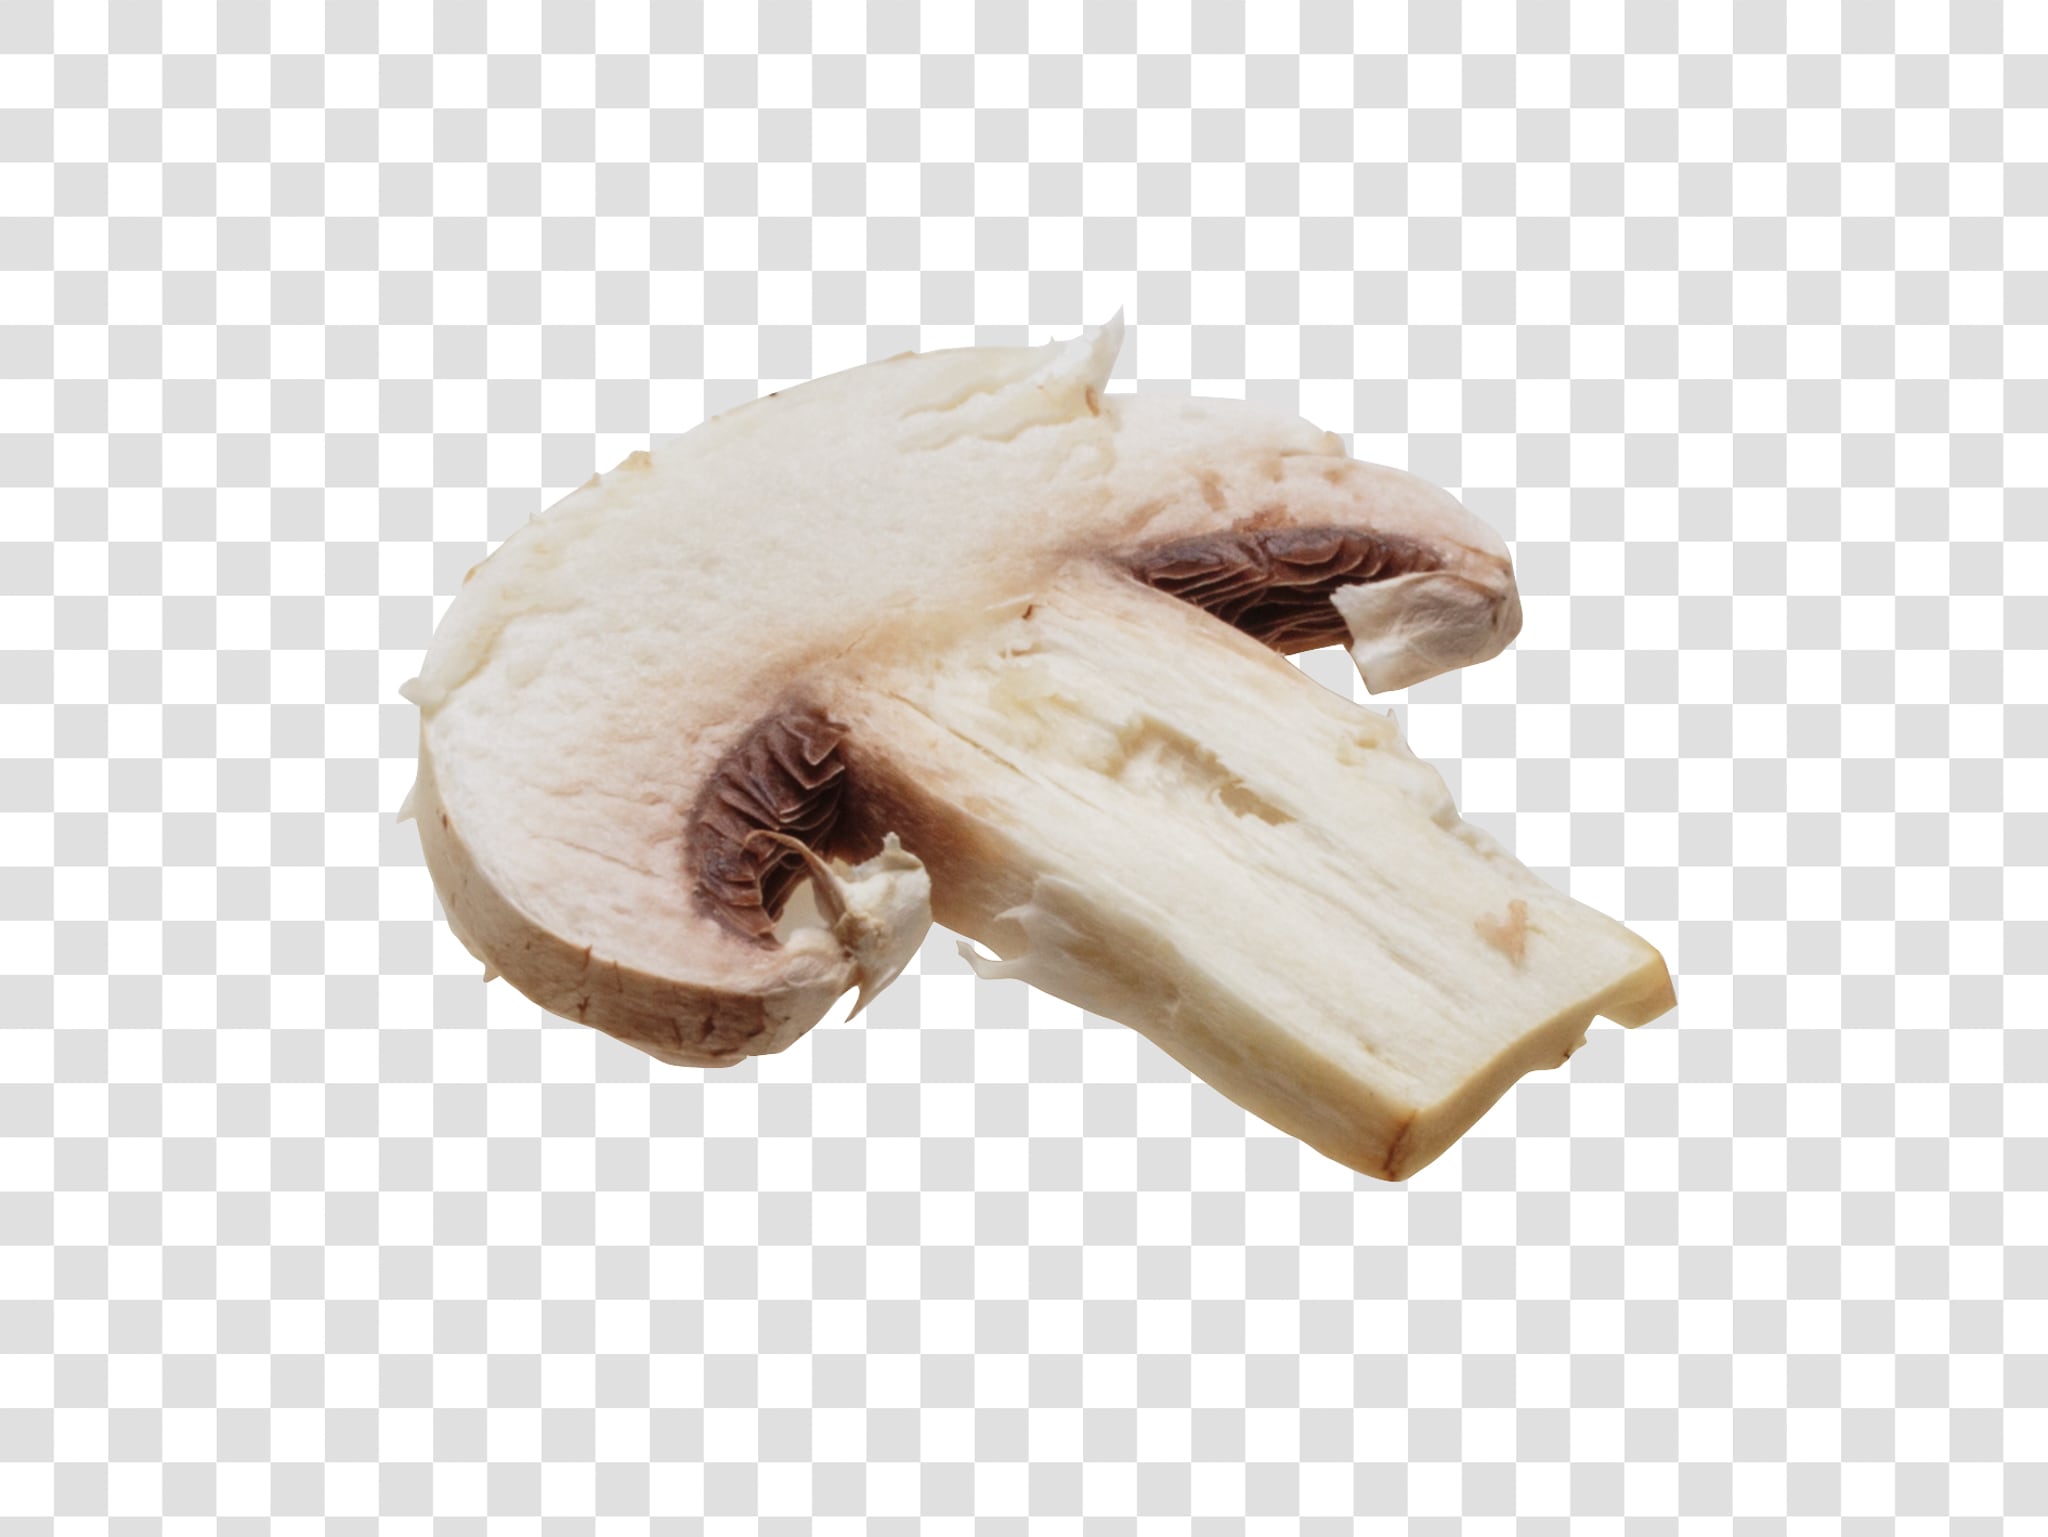 Champignon PSD image with transparent background